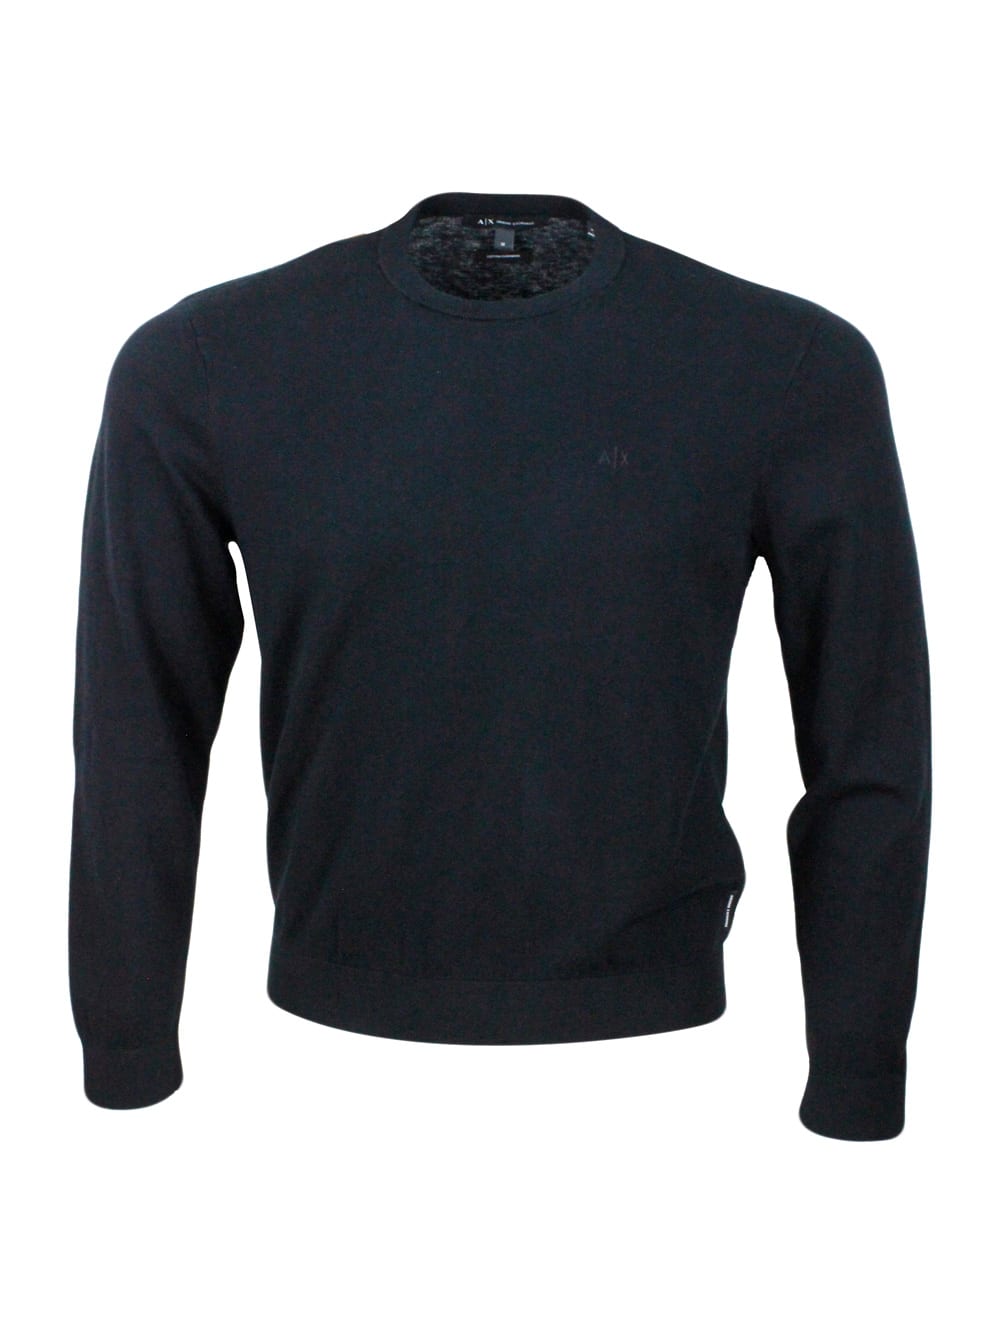 Armani Collezioni Lightweight Crew-neck Long-sleeved Sweater Made Of Warm Cotton And Cashmere With Contrasting Color P In Black